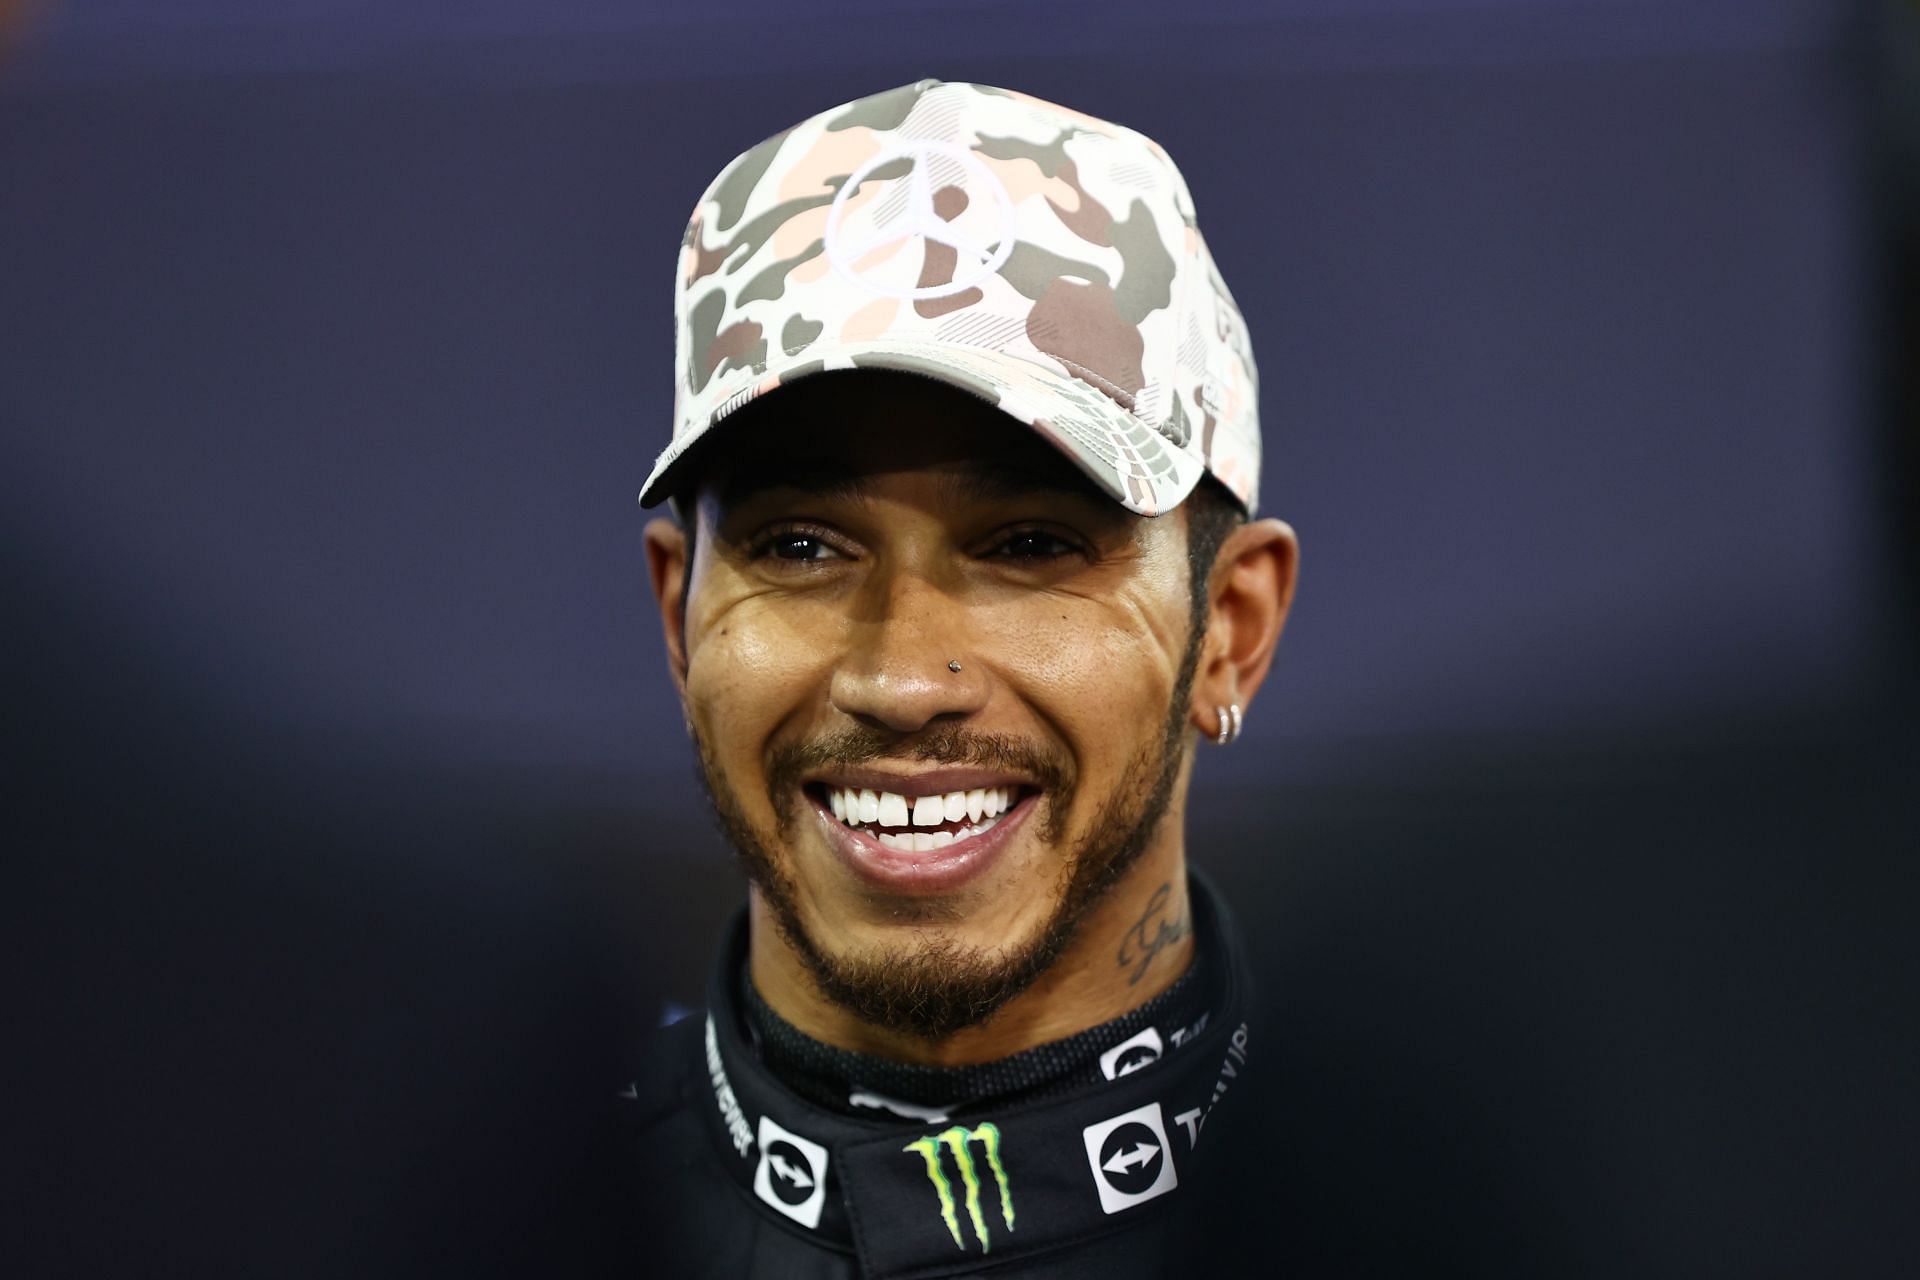 Lewis Hamilton (Photo by Mark Thompson/Getty Images)